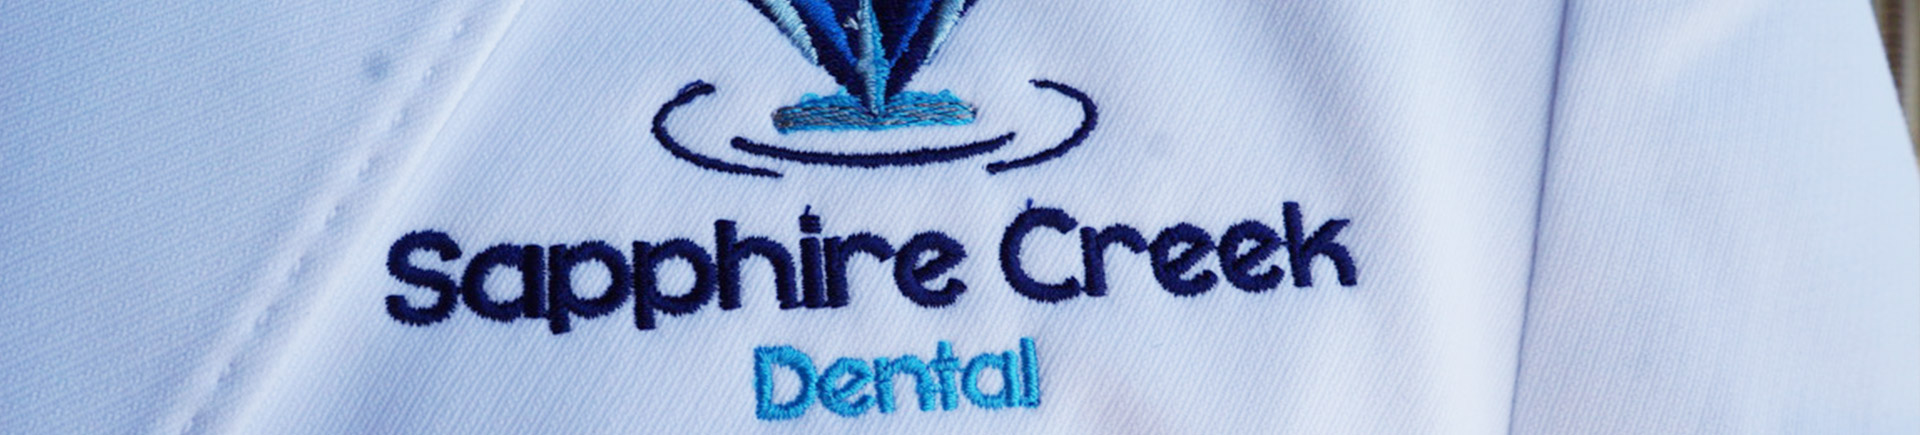 Transform Your Smile: The Latest Cosmetic Dentistry Treatment Options New Braunfels, TX